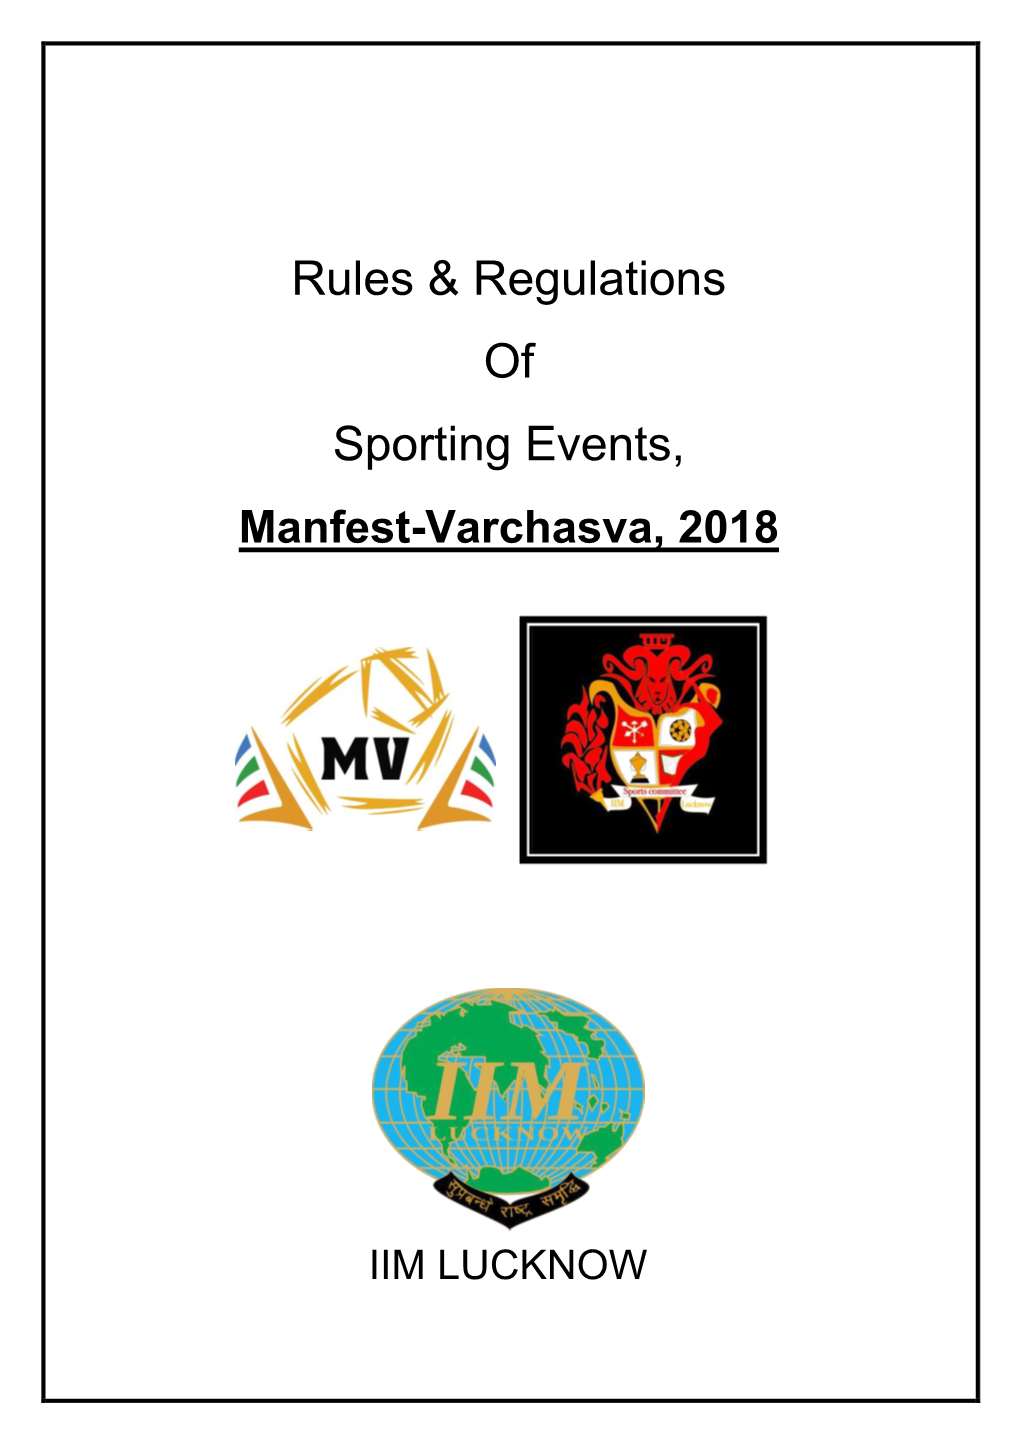 Rules & Regulations of Sporting Events